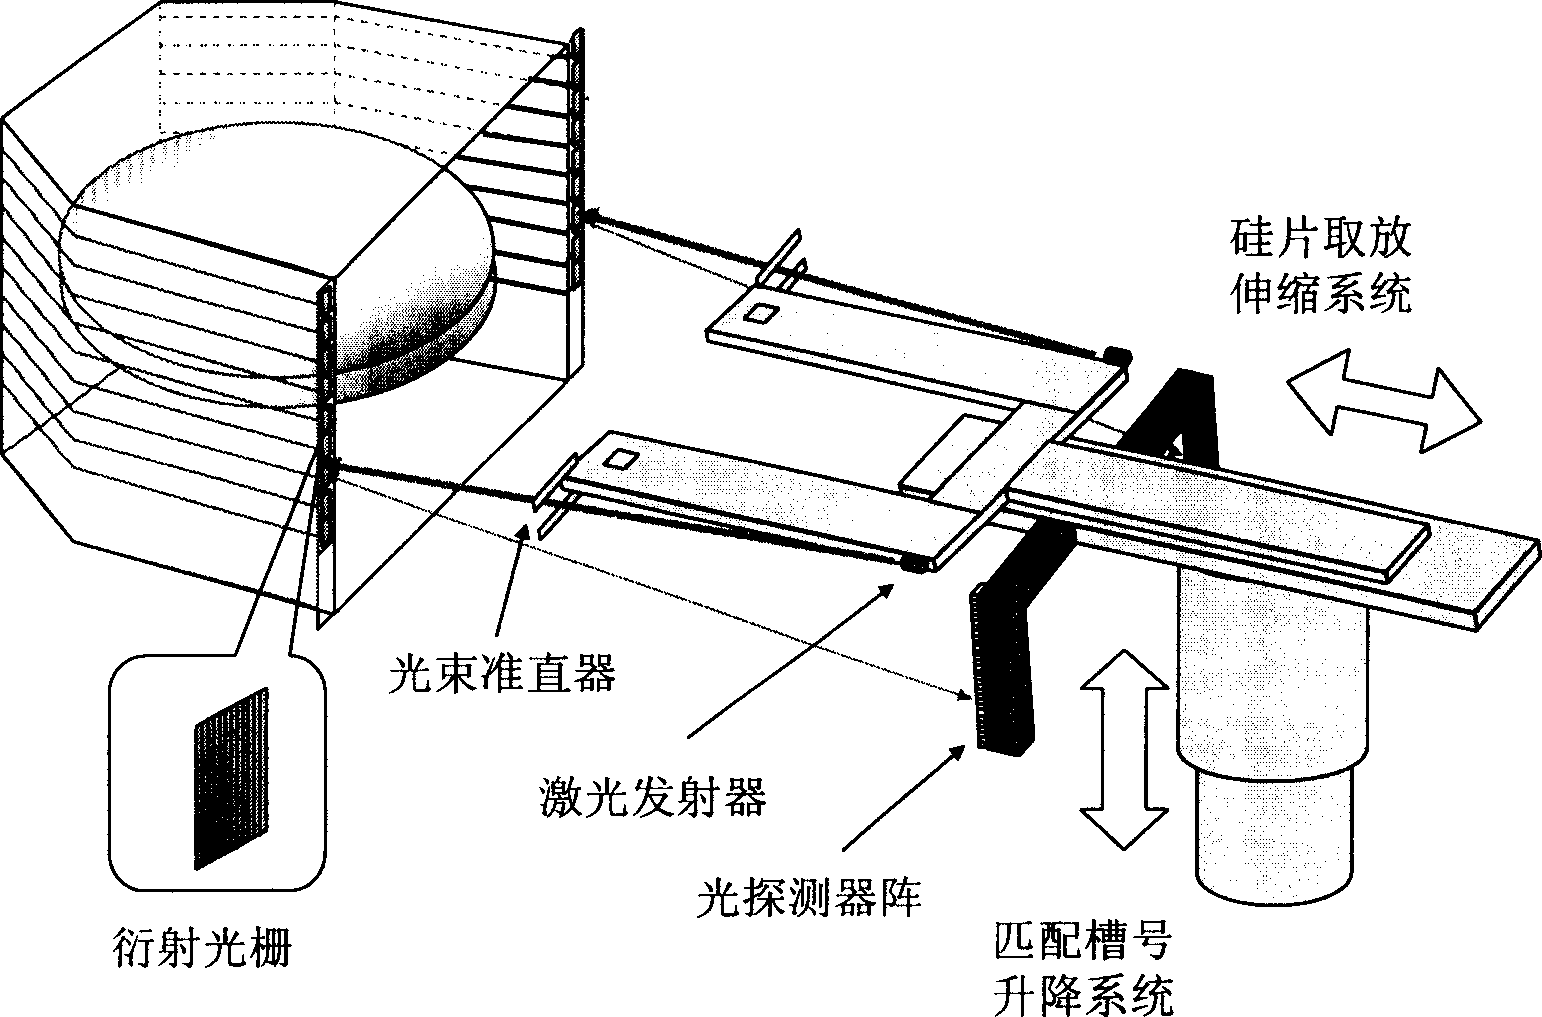 Manil putor automatic silicon-wafer grabbing system and method